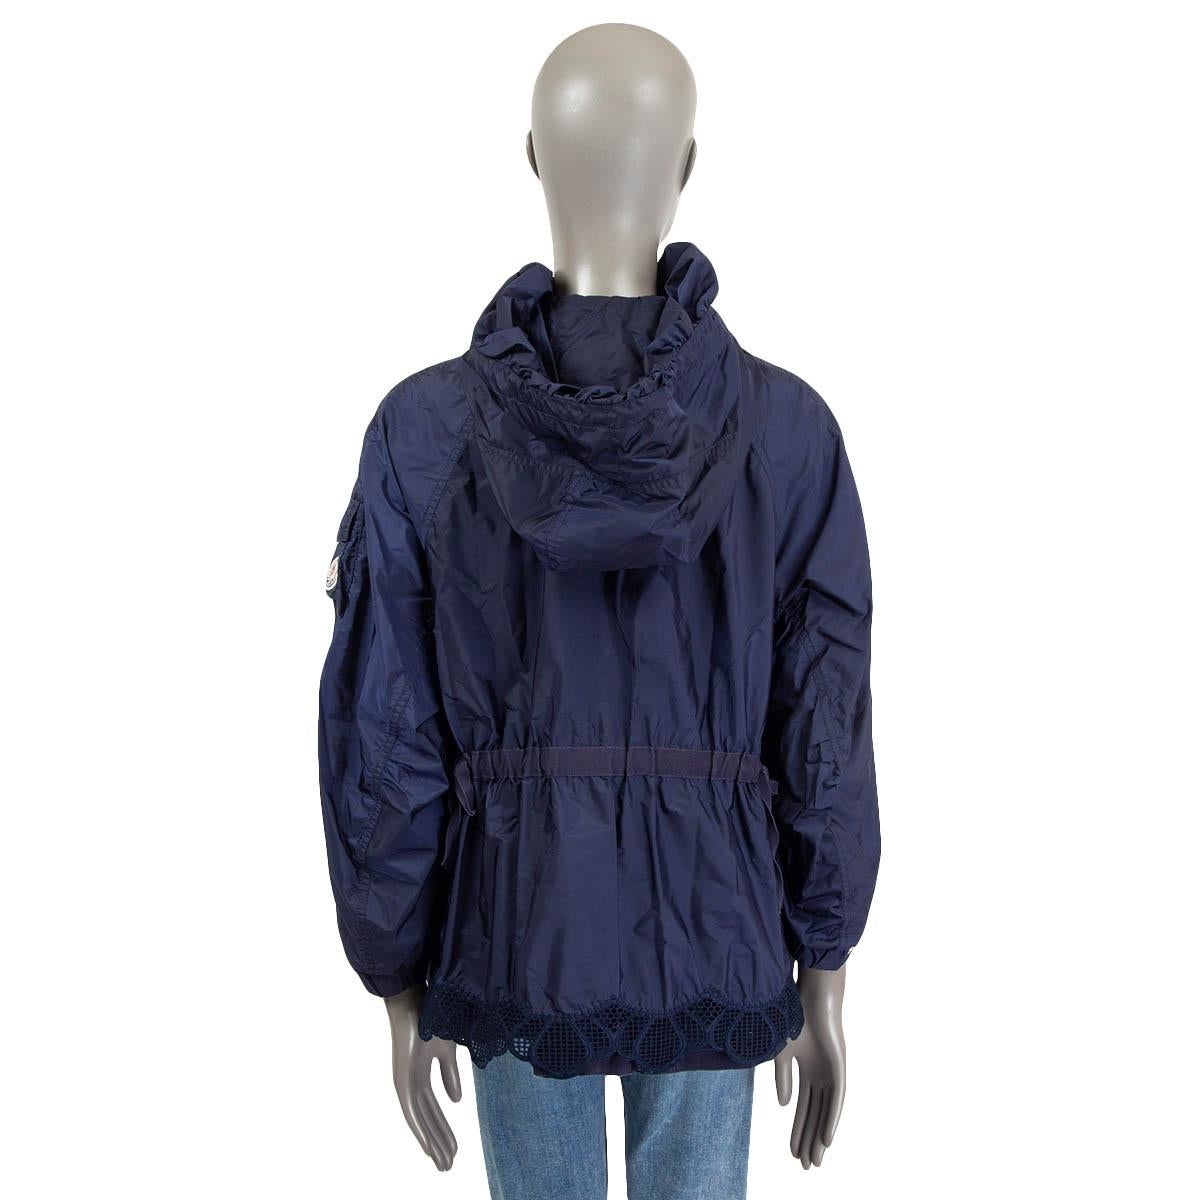 MONCLER blue BRODERIE ANGLAISE Windbreaker Jacket 2 M 1